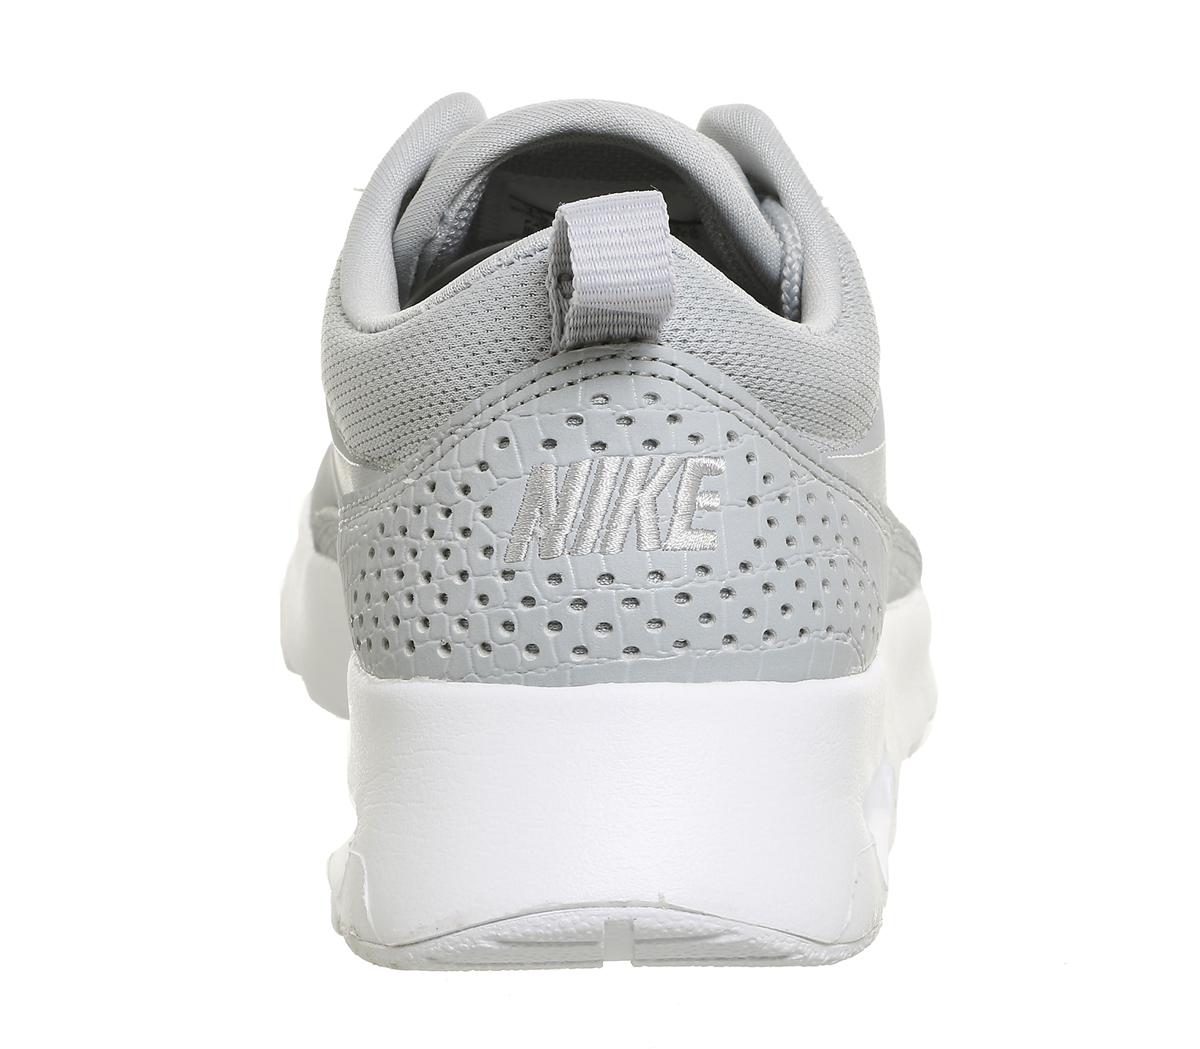 Nike Synthetic Air Max Thea Trainers in Grey (Gray) - Lyst